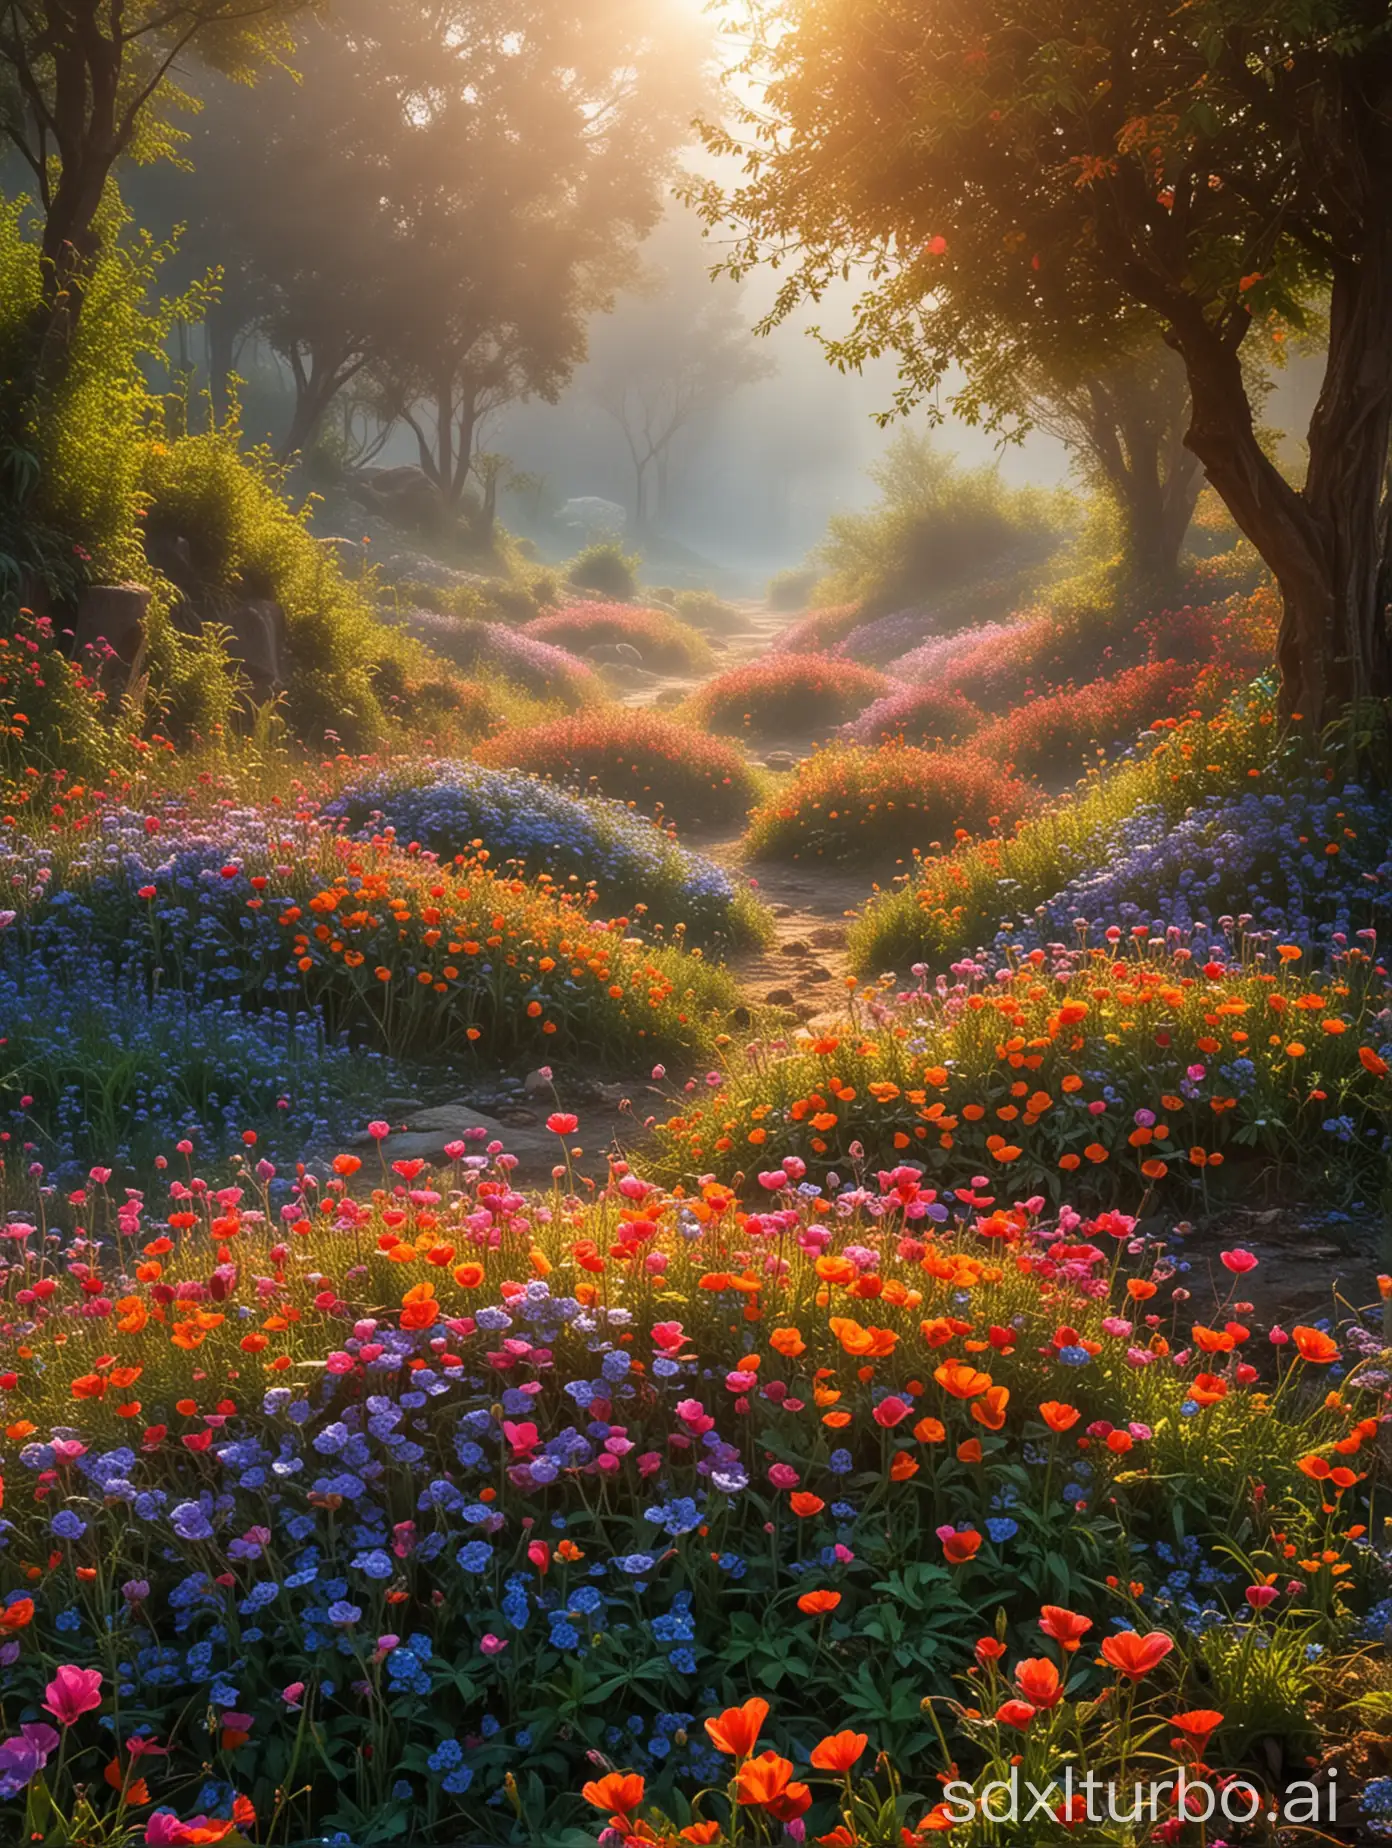 morning, flower, mysterious, colorful, beautiful landscape, world heritage, masterpiece